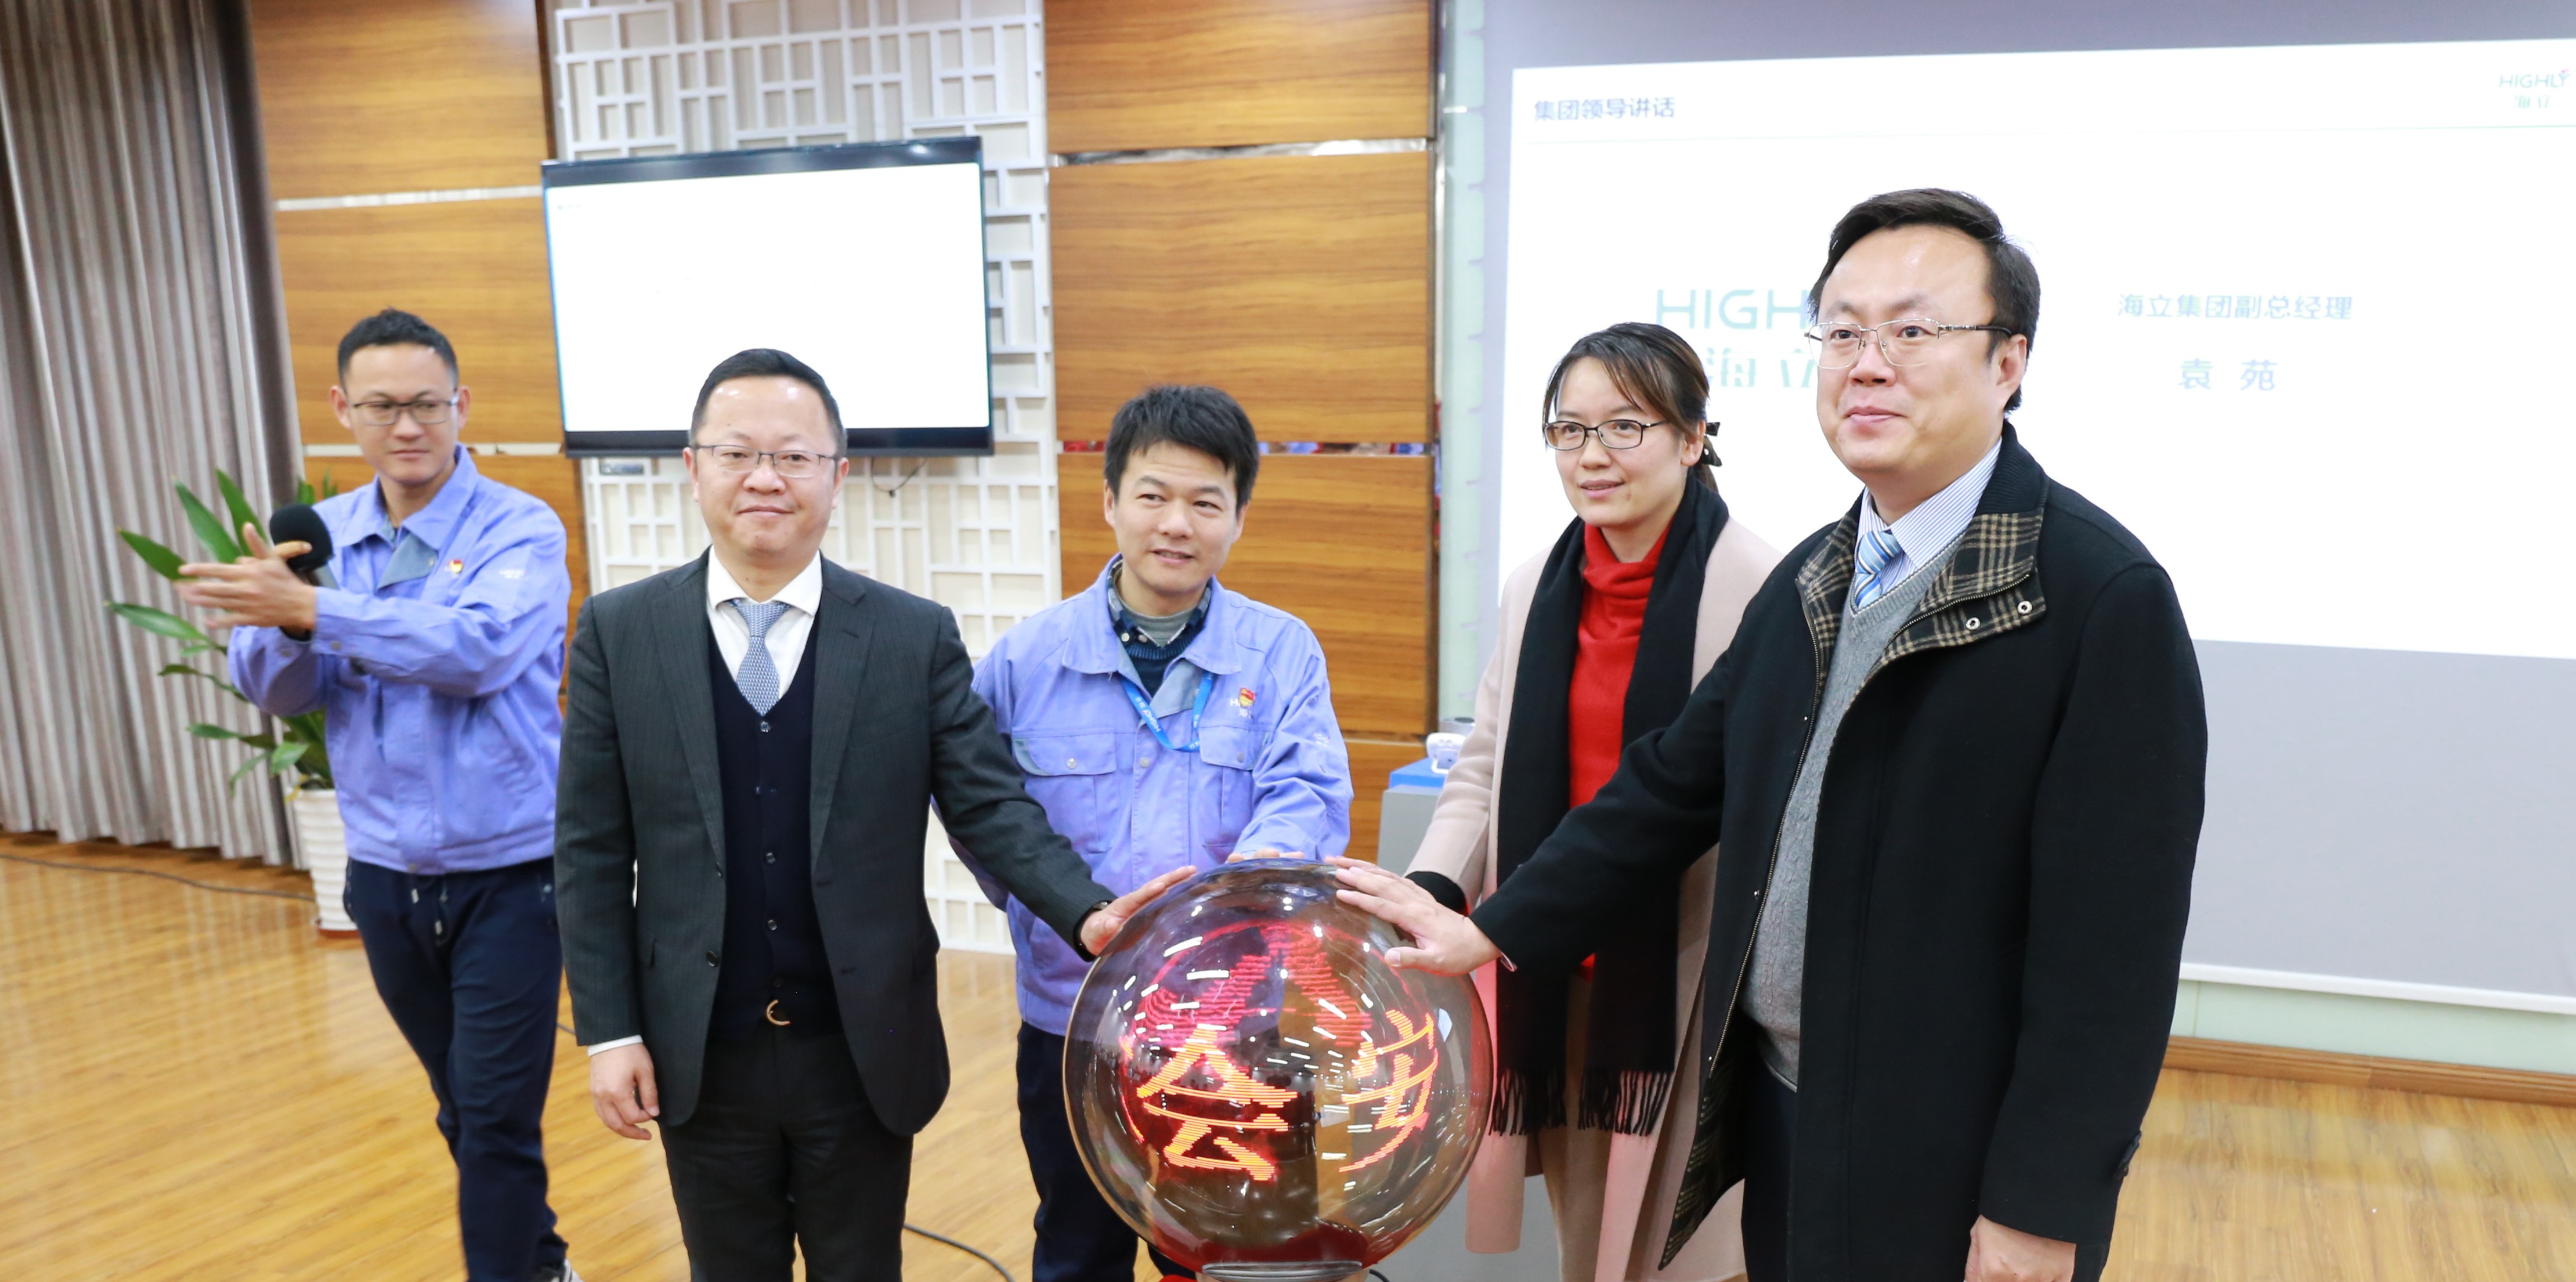 Building a smart enterprise with digitalization, Anhui Highly launches SAP  ERP projects